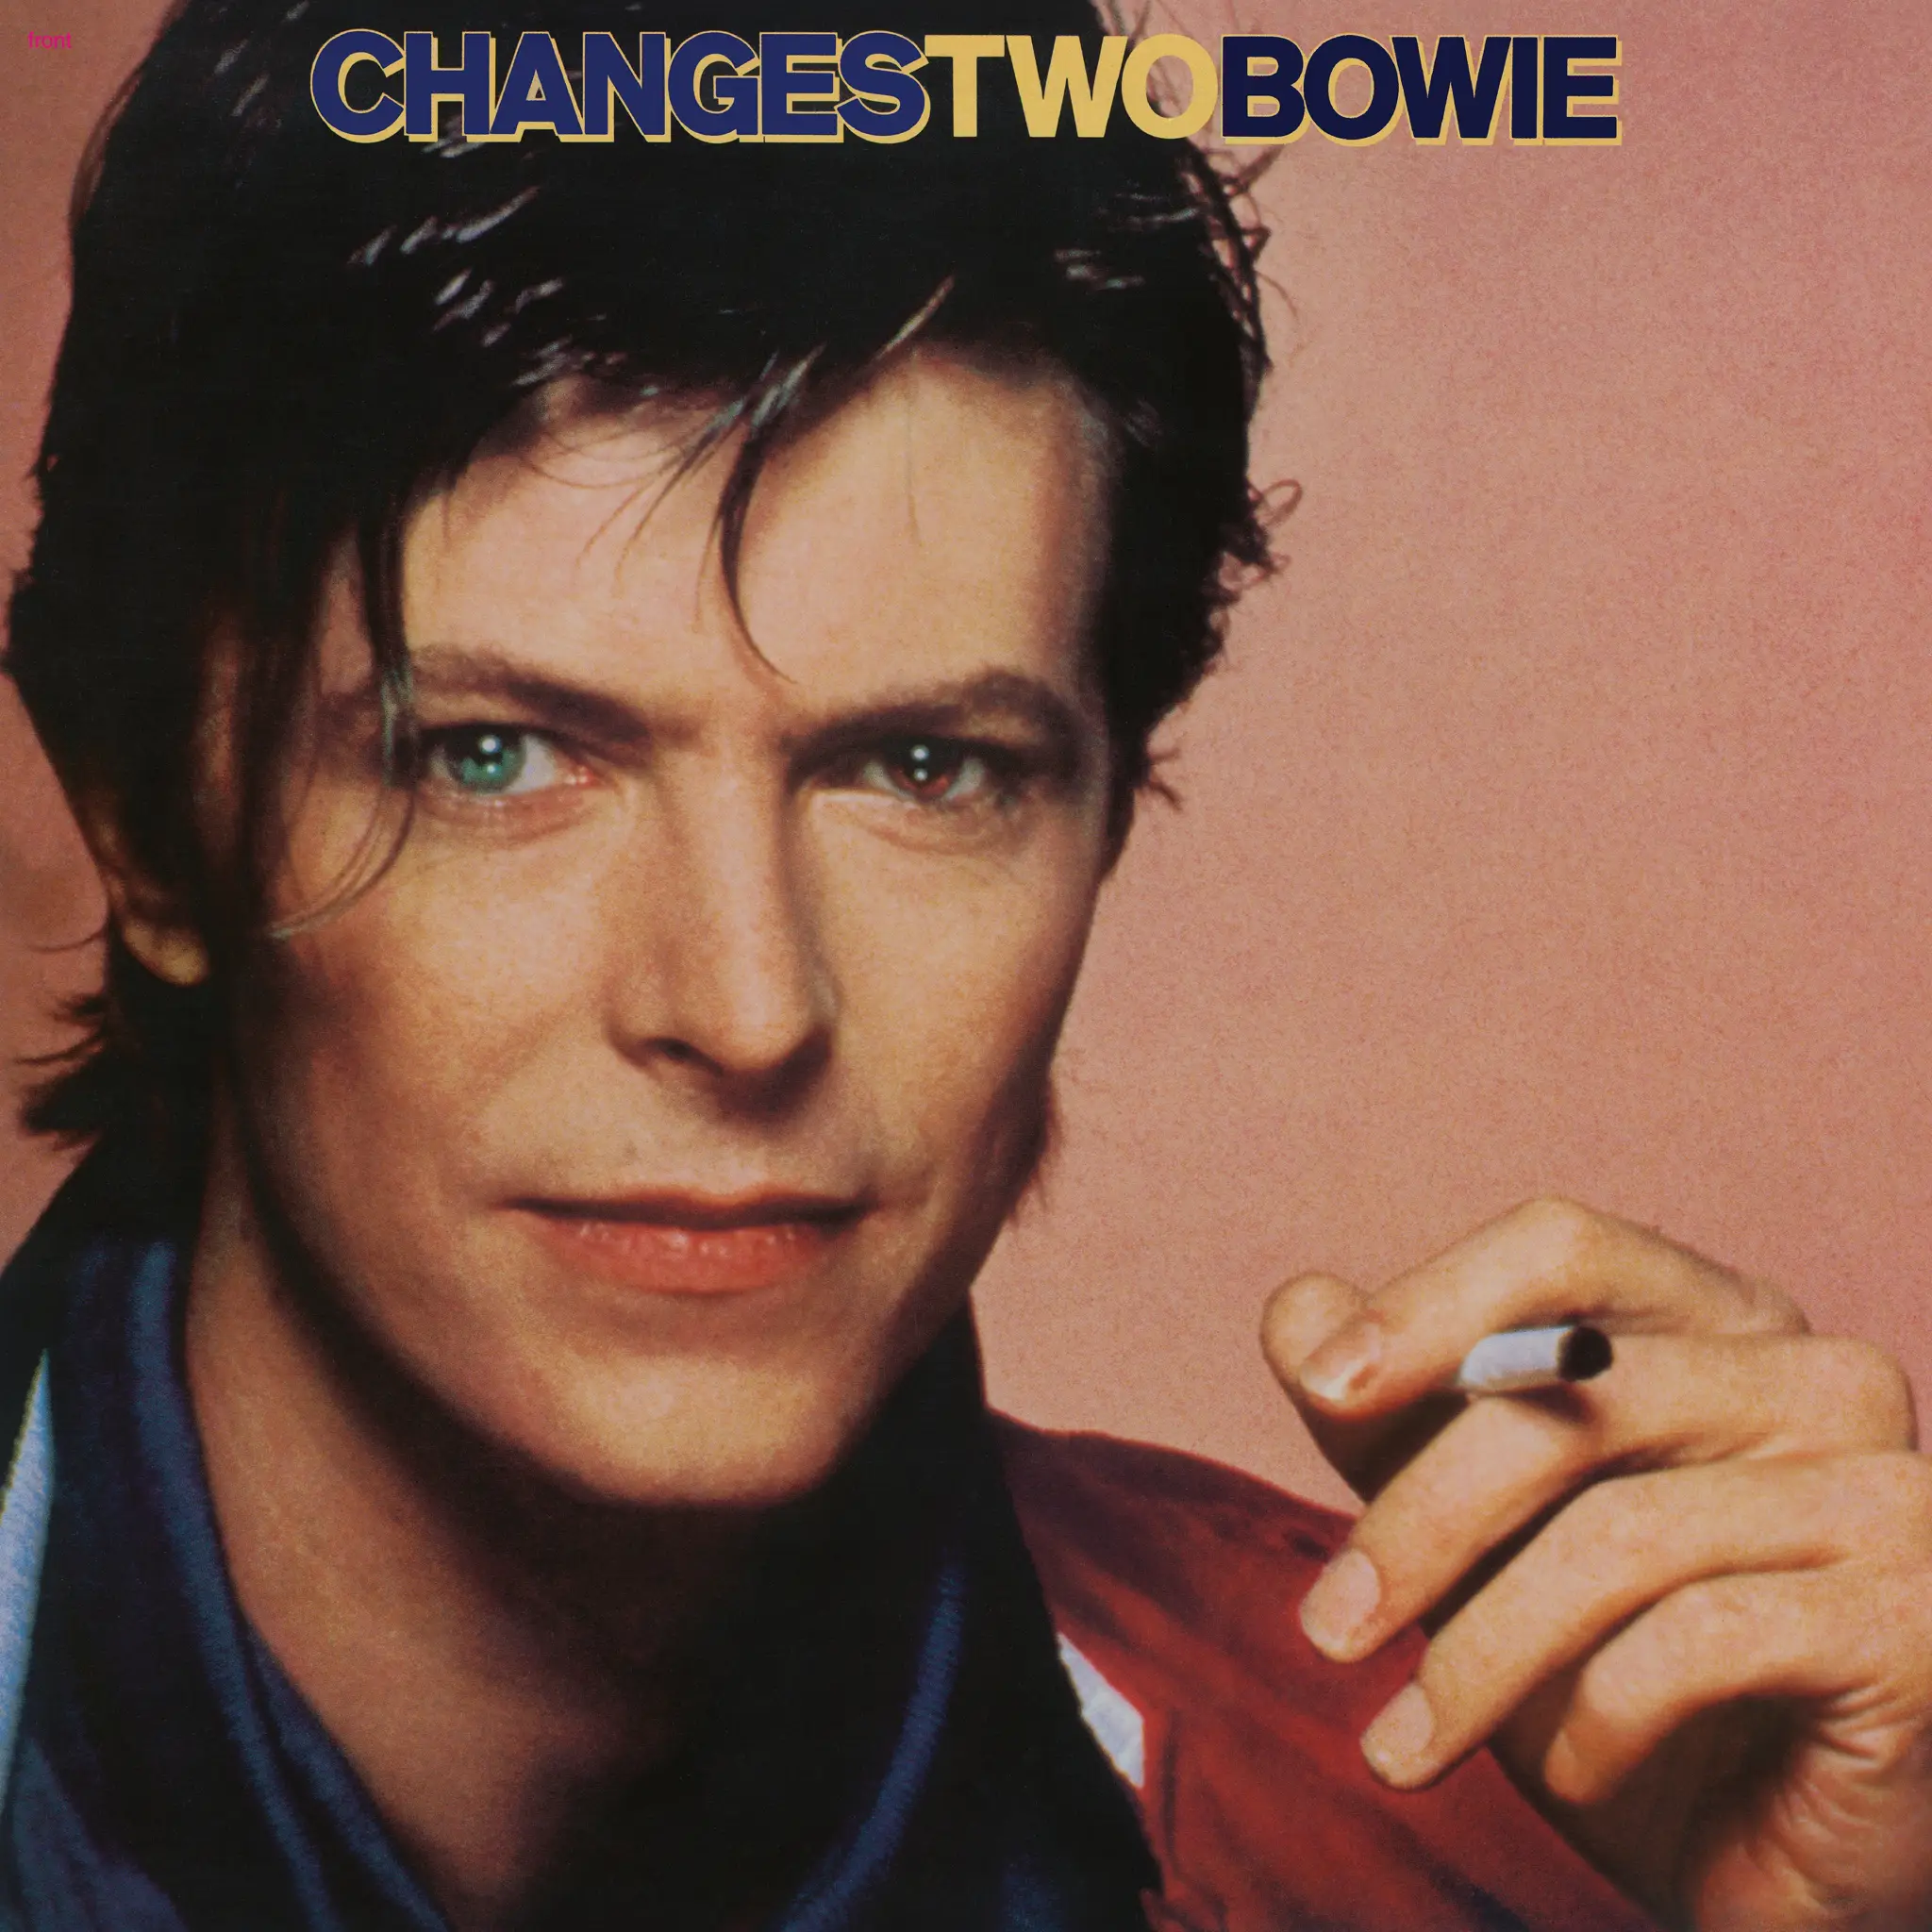 <strong>David Bowie - ChangesTwoBowie</strong> (Vinyl LP)